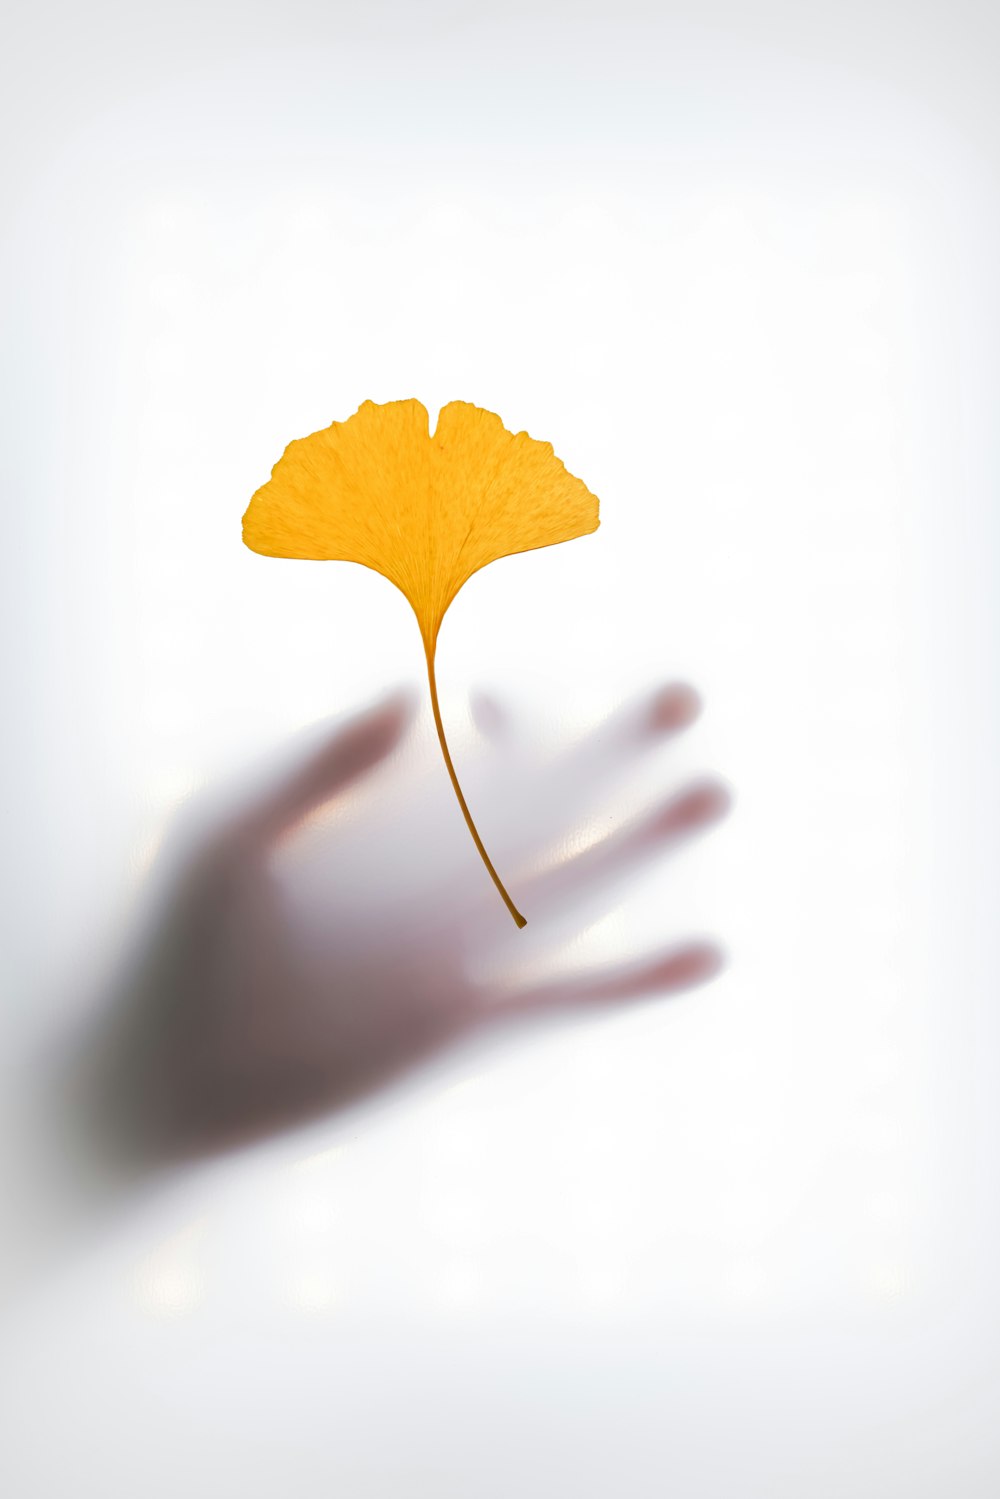 a hand holding a yellow leaf on a white background